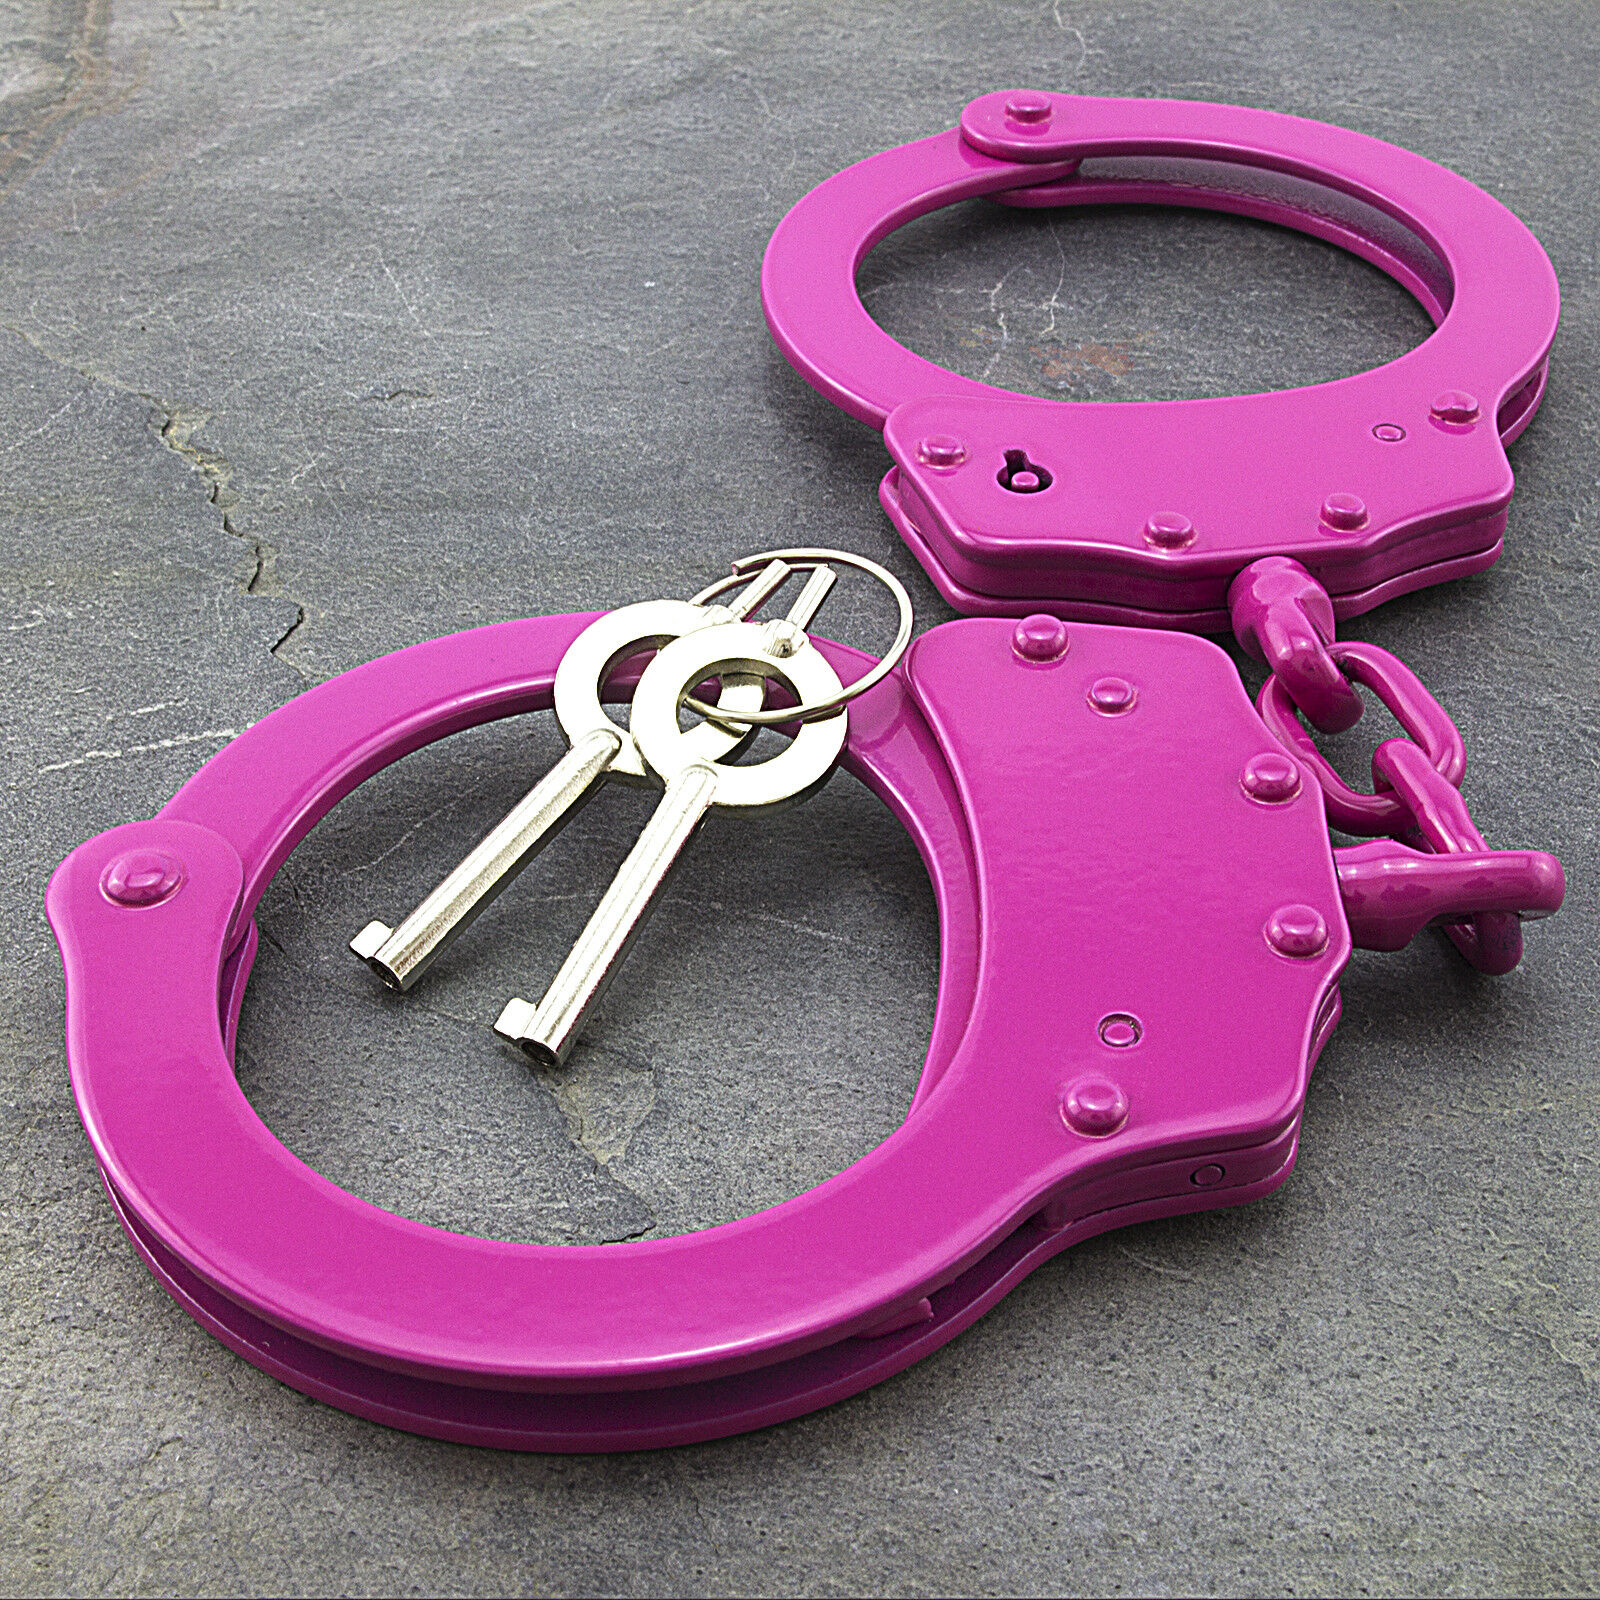 Pink Double Lock Nickel Plated Heavy Duty Stainless Steel Hand Cuffs + Keys Real